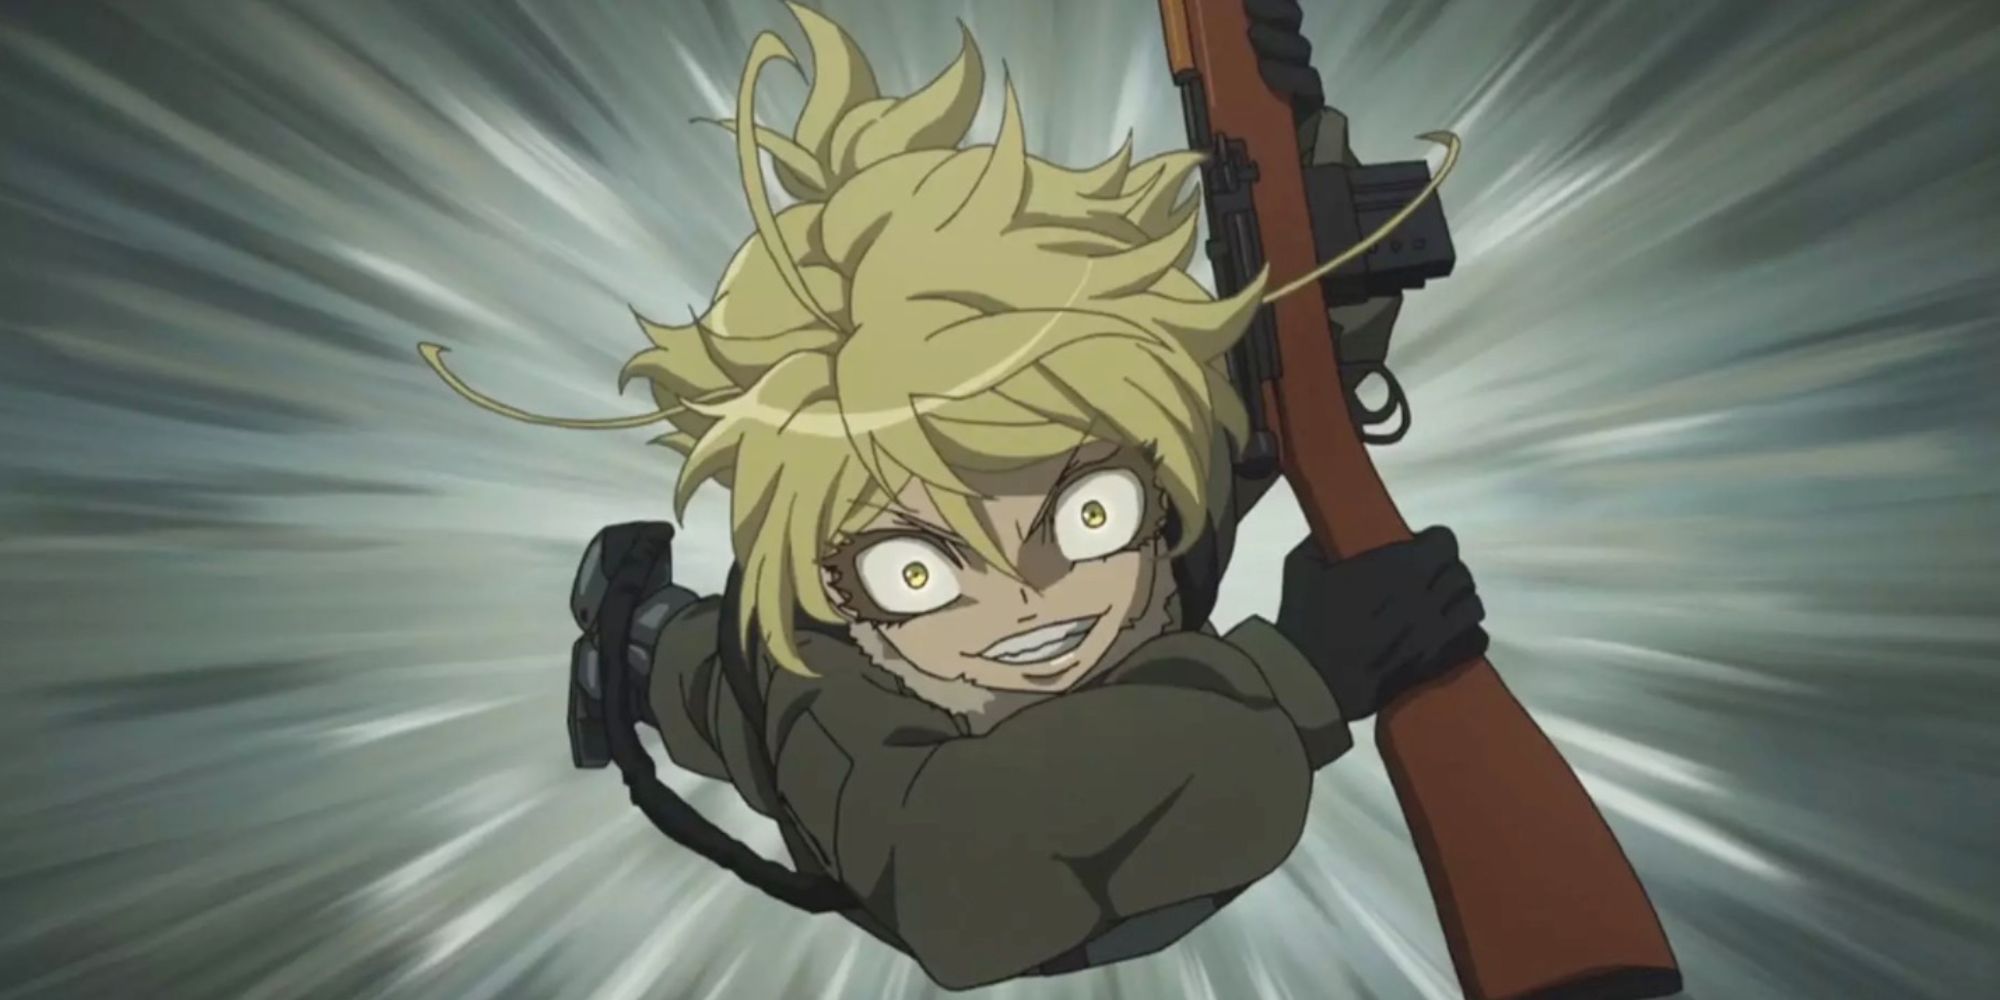 Saga Of Tanya The Evil: Best Anime To Watch If You Love Attack On Titan